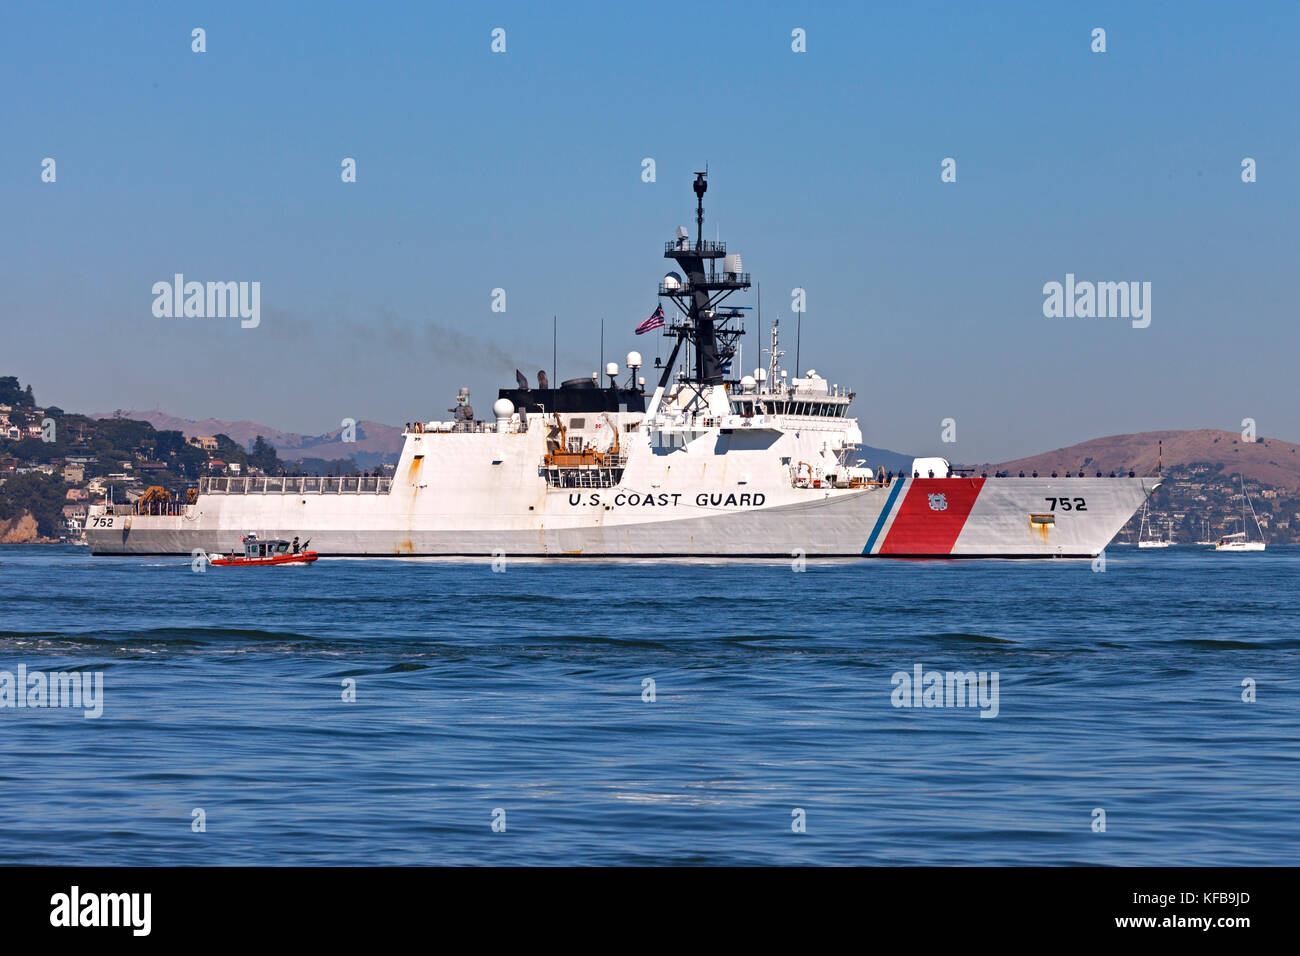 The USCG Legend class cutter Stratton (WMSL 752) on San Francisco Bay. The Stratton is the third of the Legend class cutters. Stock Photo